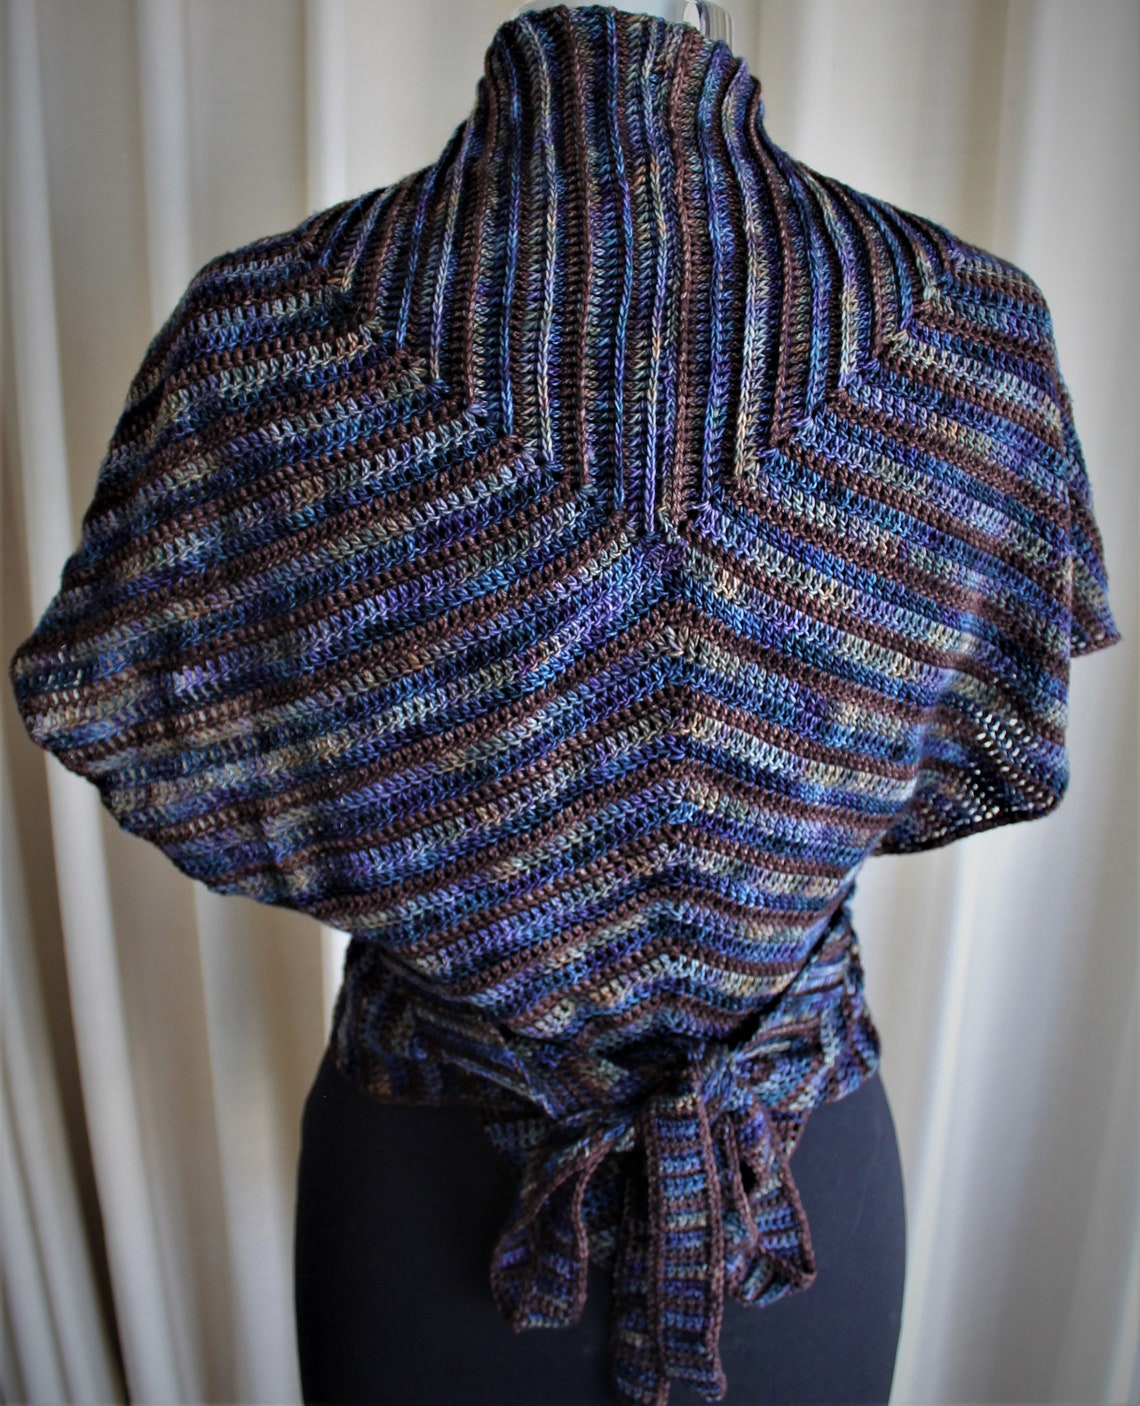 Crochet Pattern Future Connections Shawl - Etsy